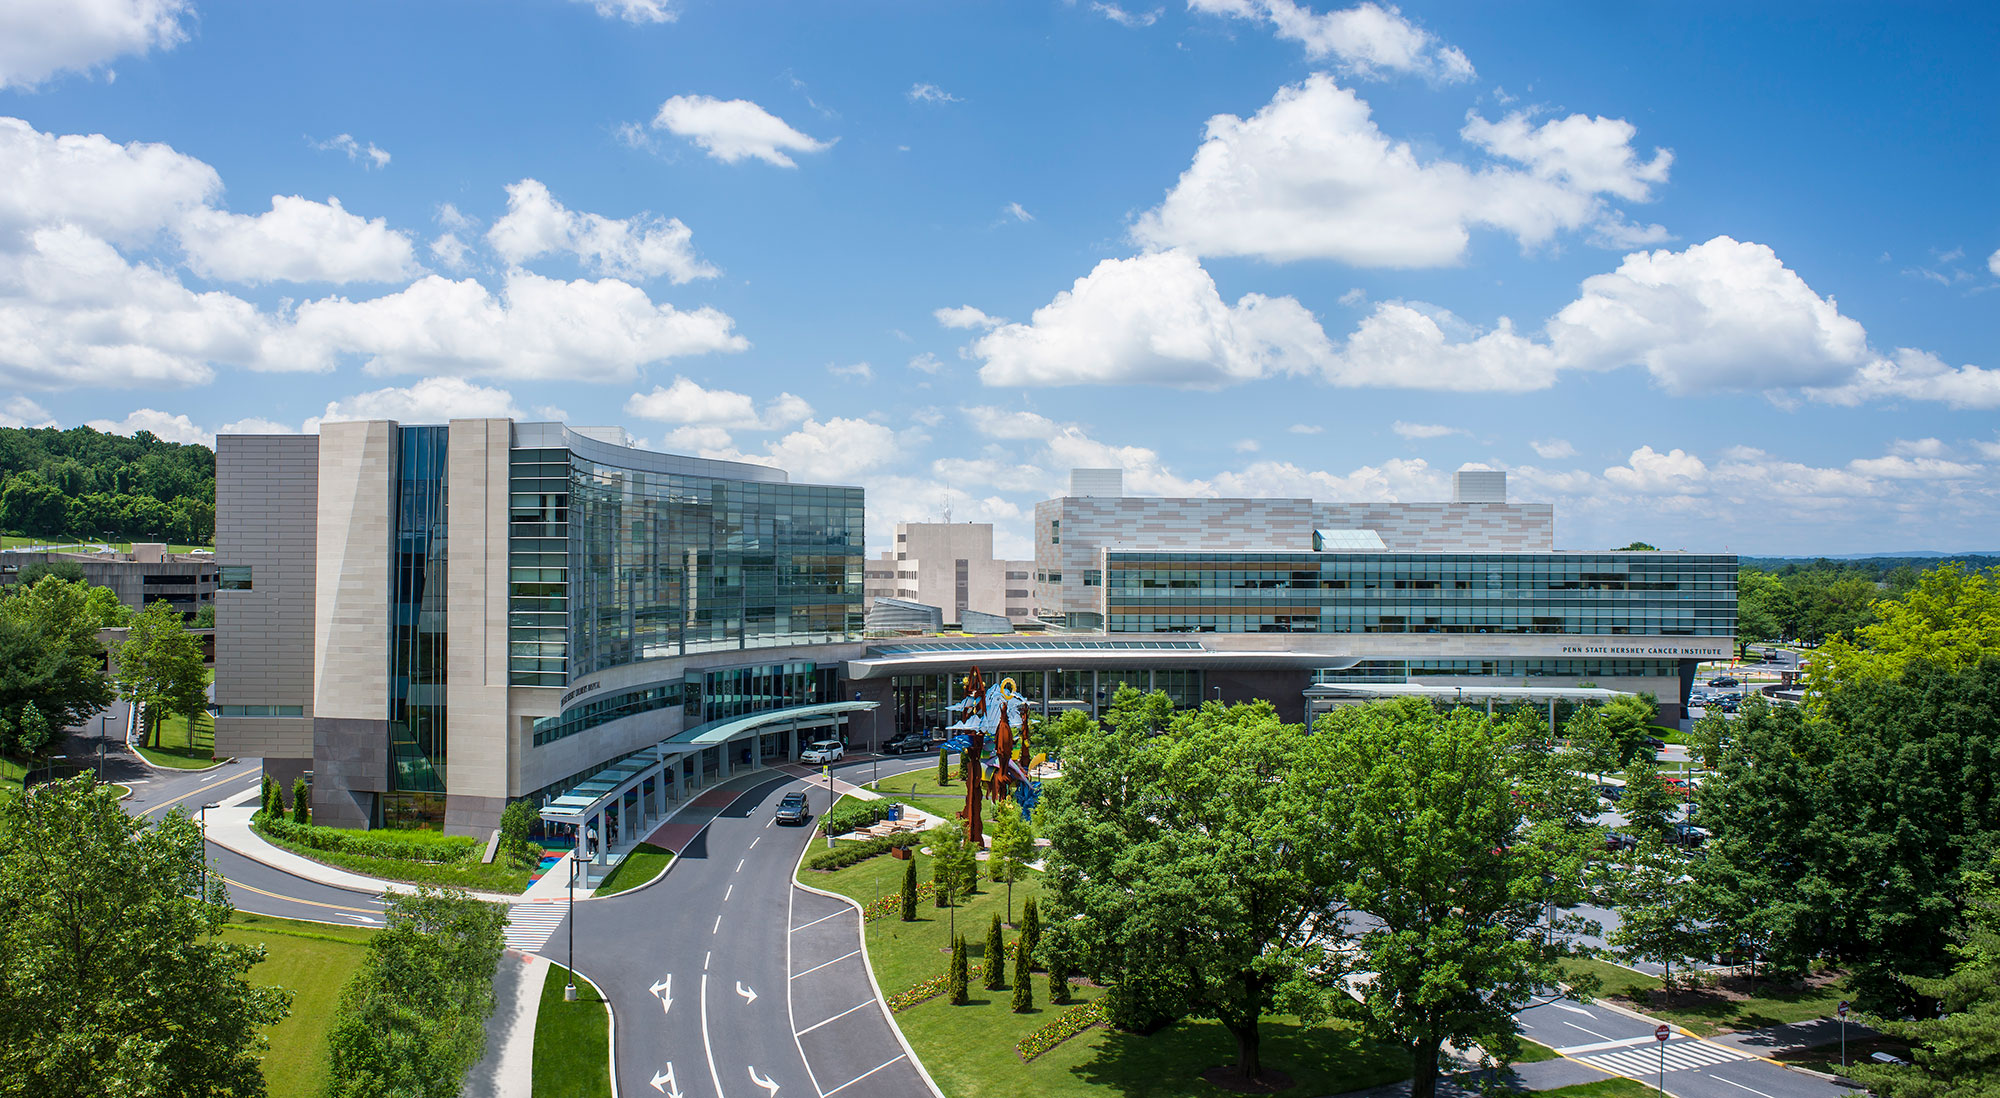 An aerial view of the campus of Penn State Health Milton S. Hershey Medical Center